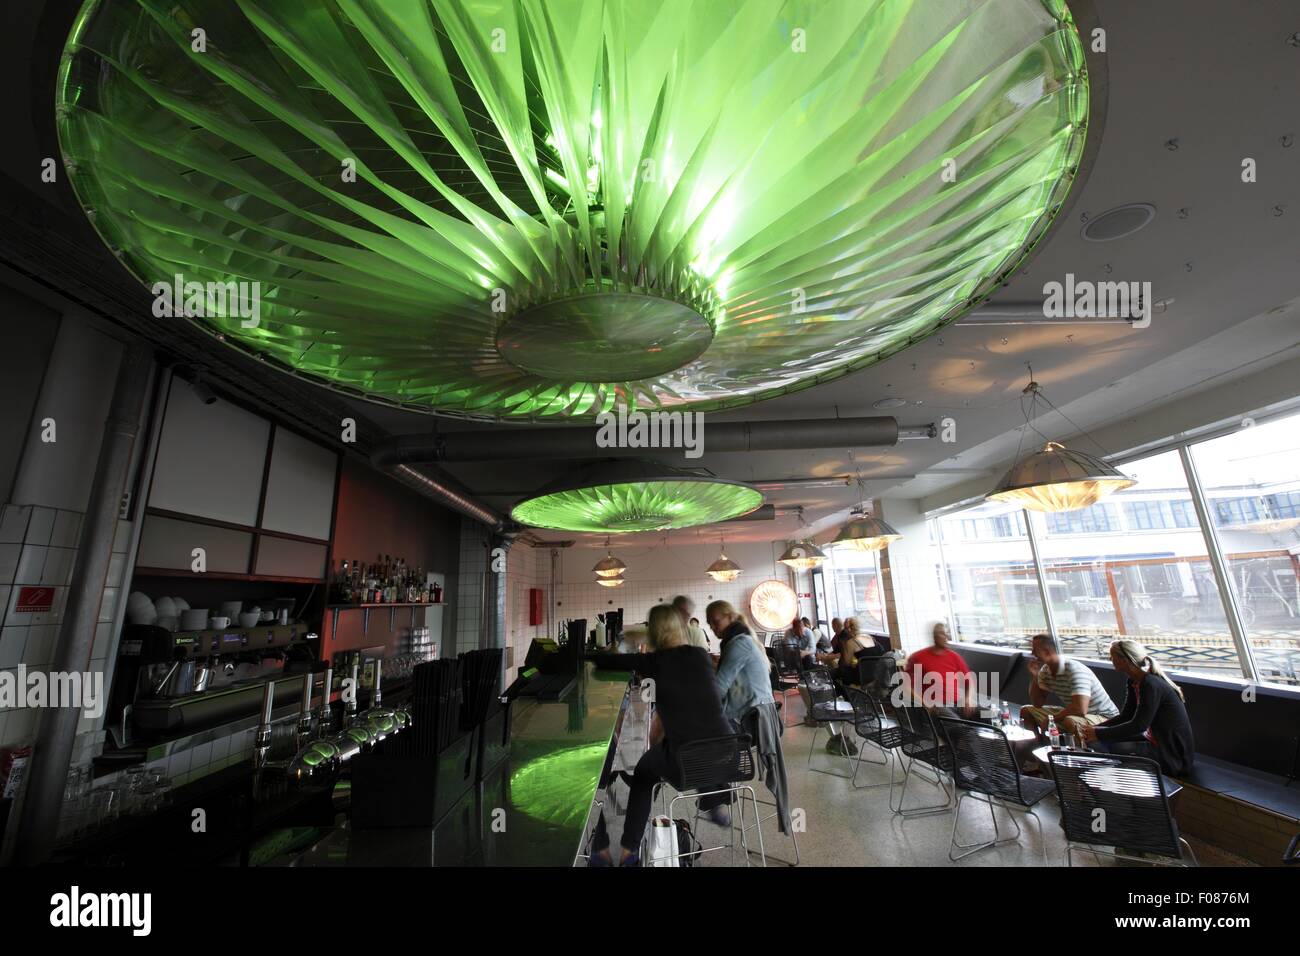 People at Karriere Bar with green lamps on ceiling, Copenhagen, Denmark Stock Photo